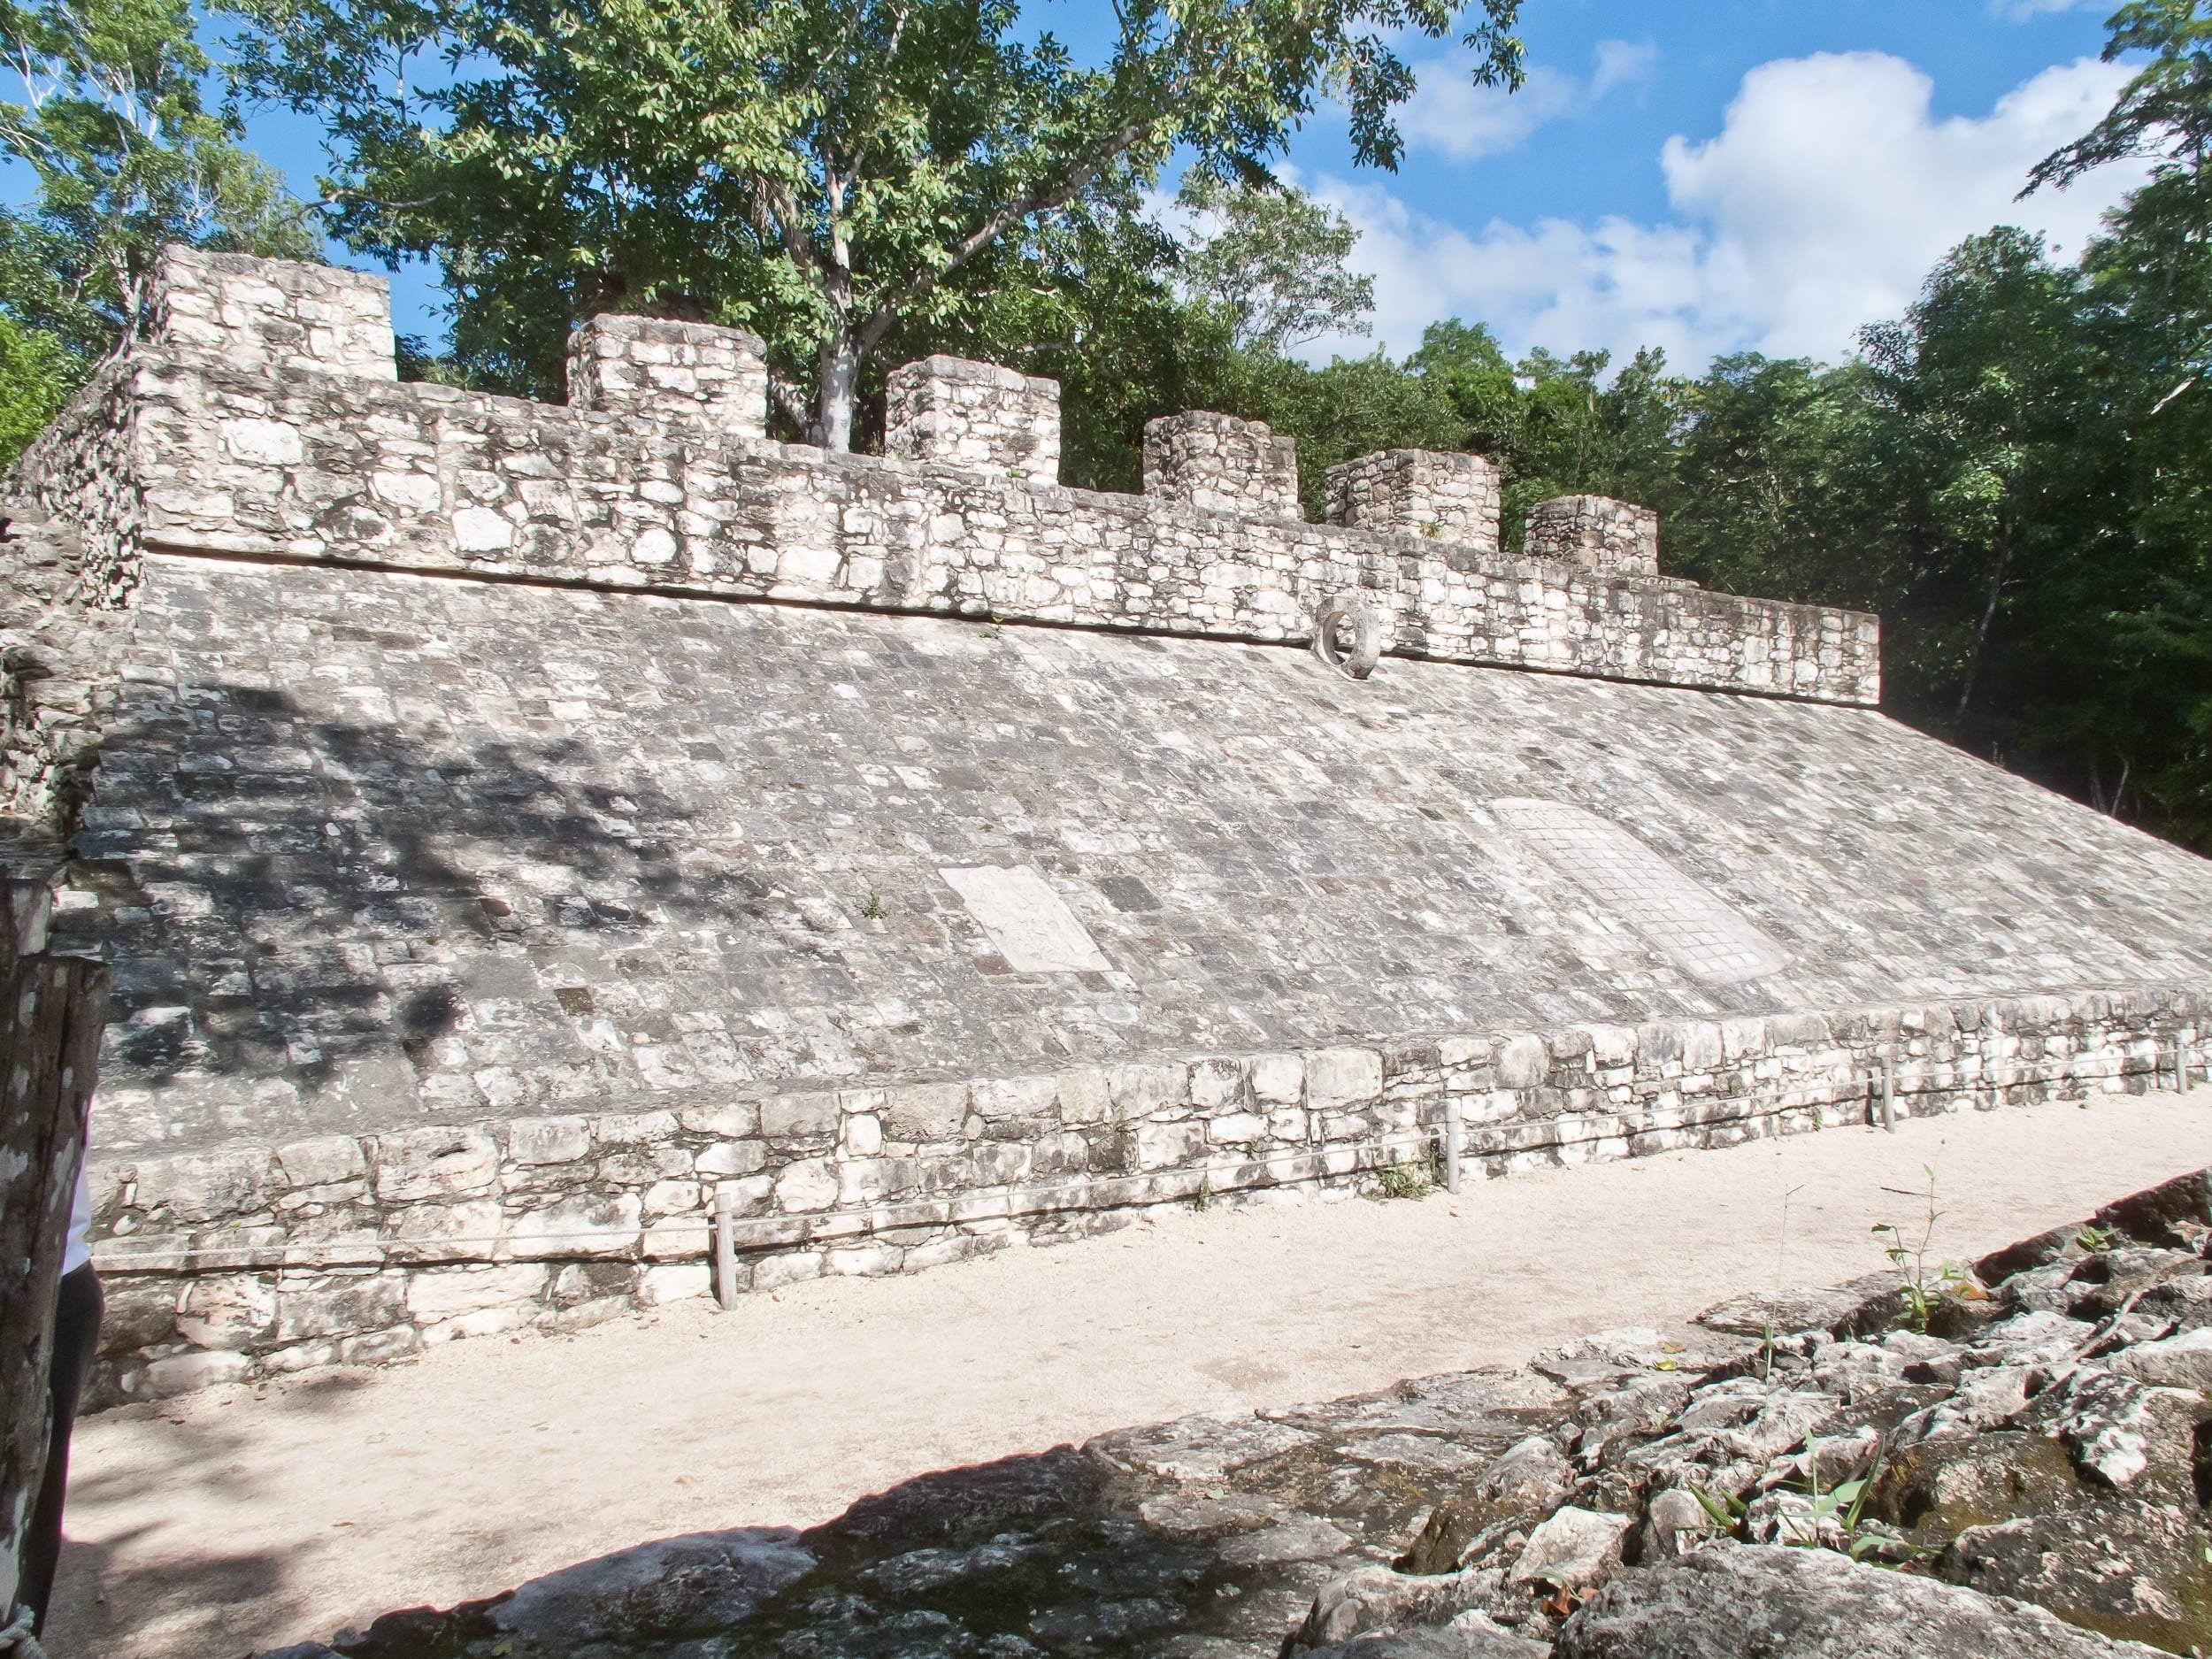 Image of one of the sides of the court used in the Mayan Ball Games of Cobá